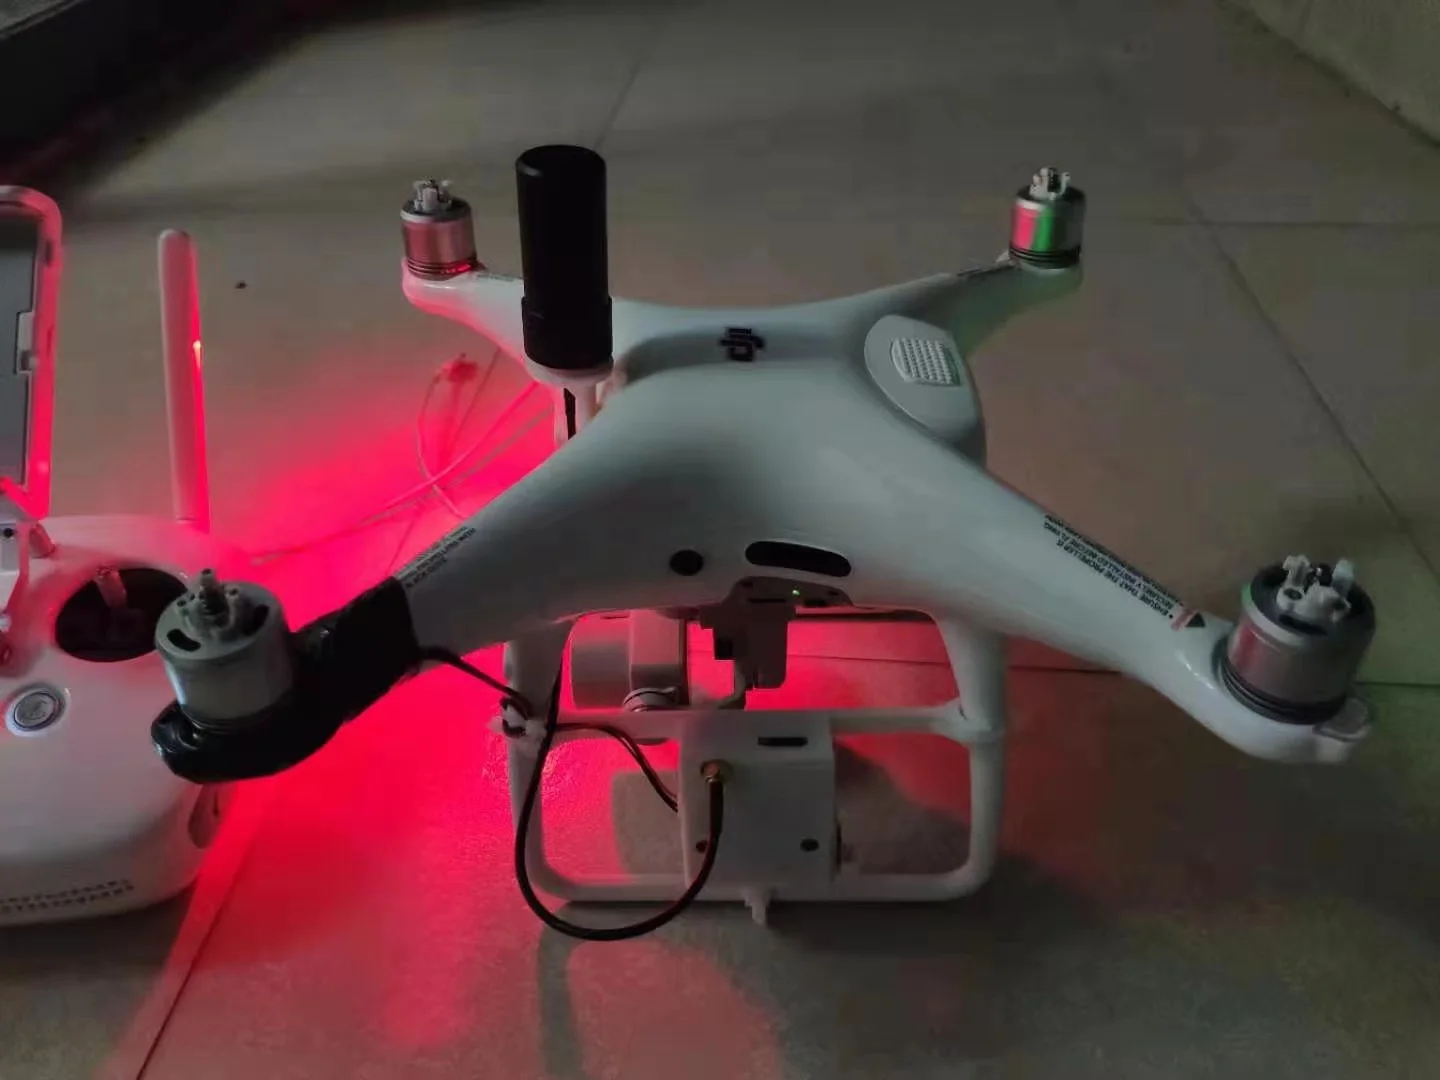 

A ppk kit that can be used for DJI drones